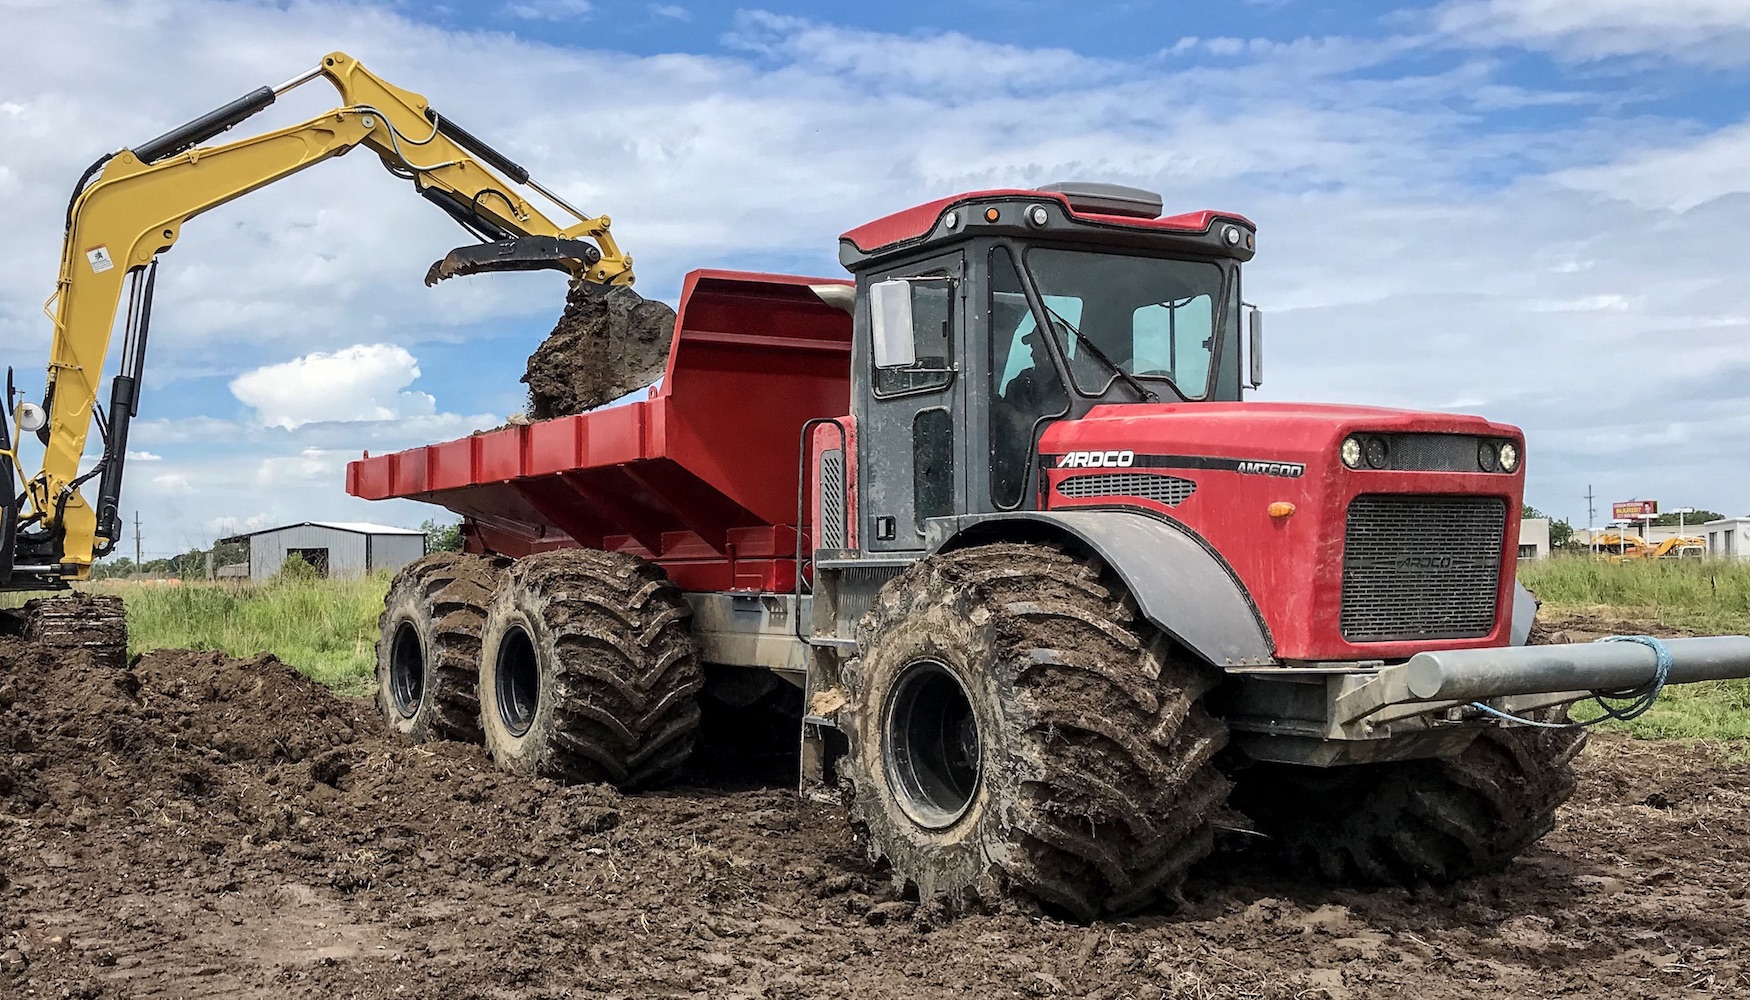 ARDCO Introduces AMT Dump Beds for Multi-Purpose Truck